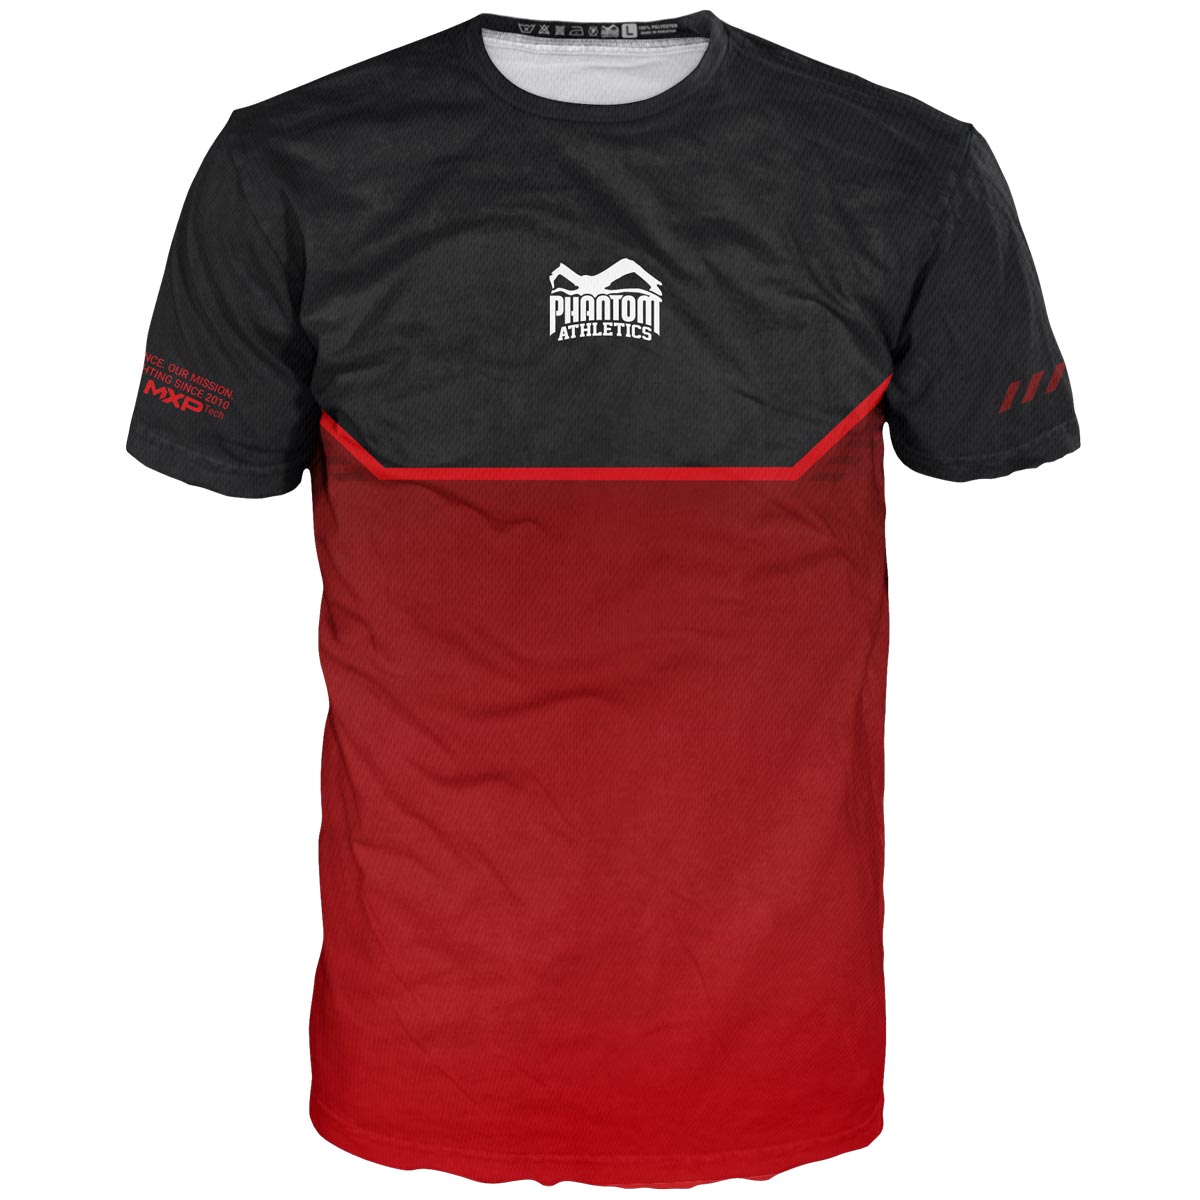 The new Phantom EVO martial arts shirt for your training. Ultra comfortable to wear and sweat resistant. Now in the limited RED Edition.